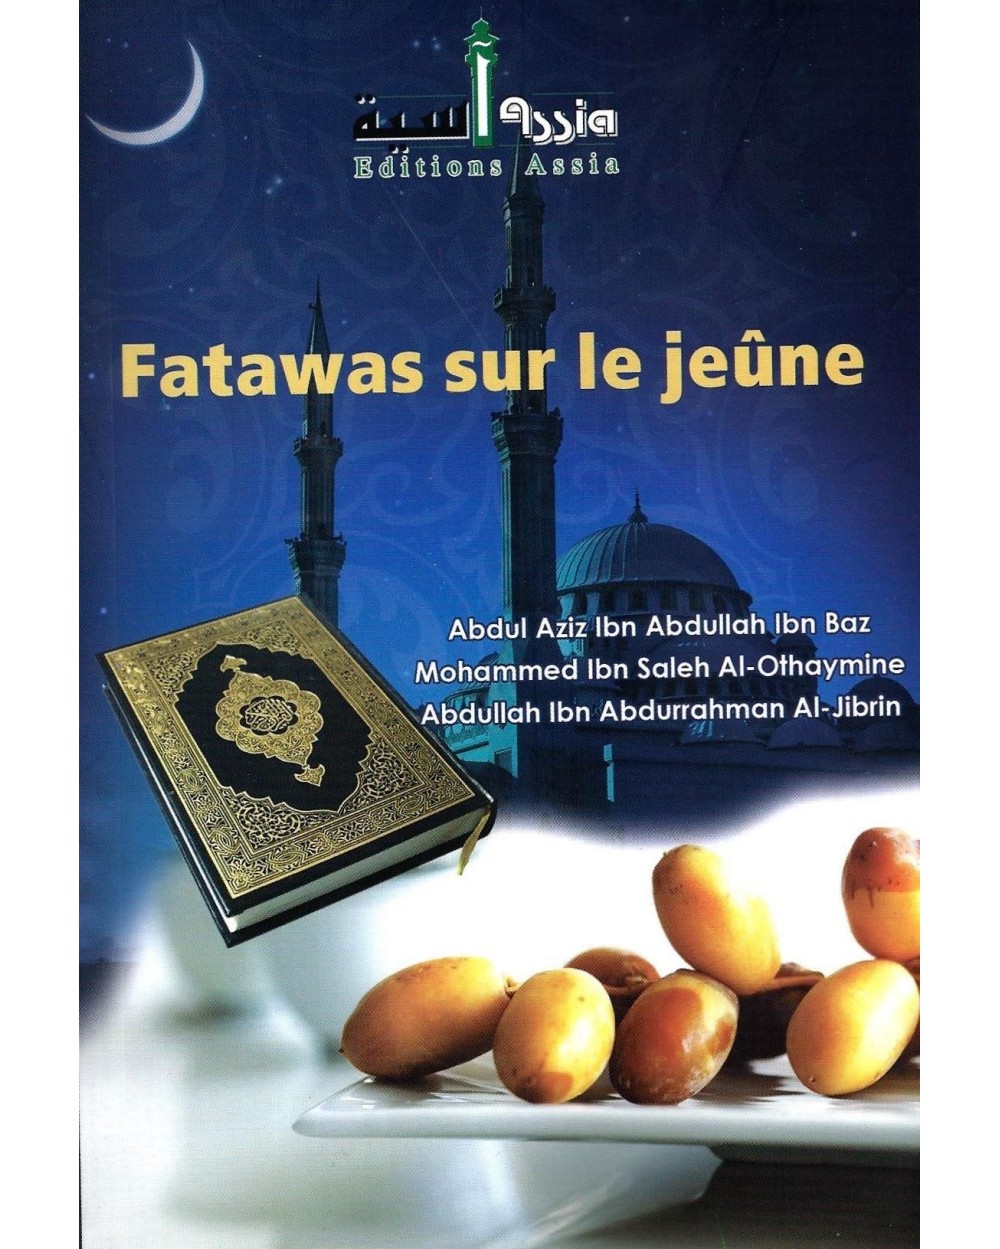 Fatawas on young people - Editions ASSIA